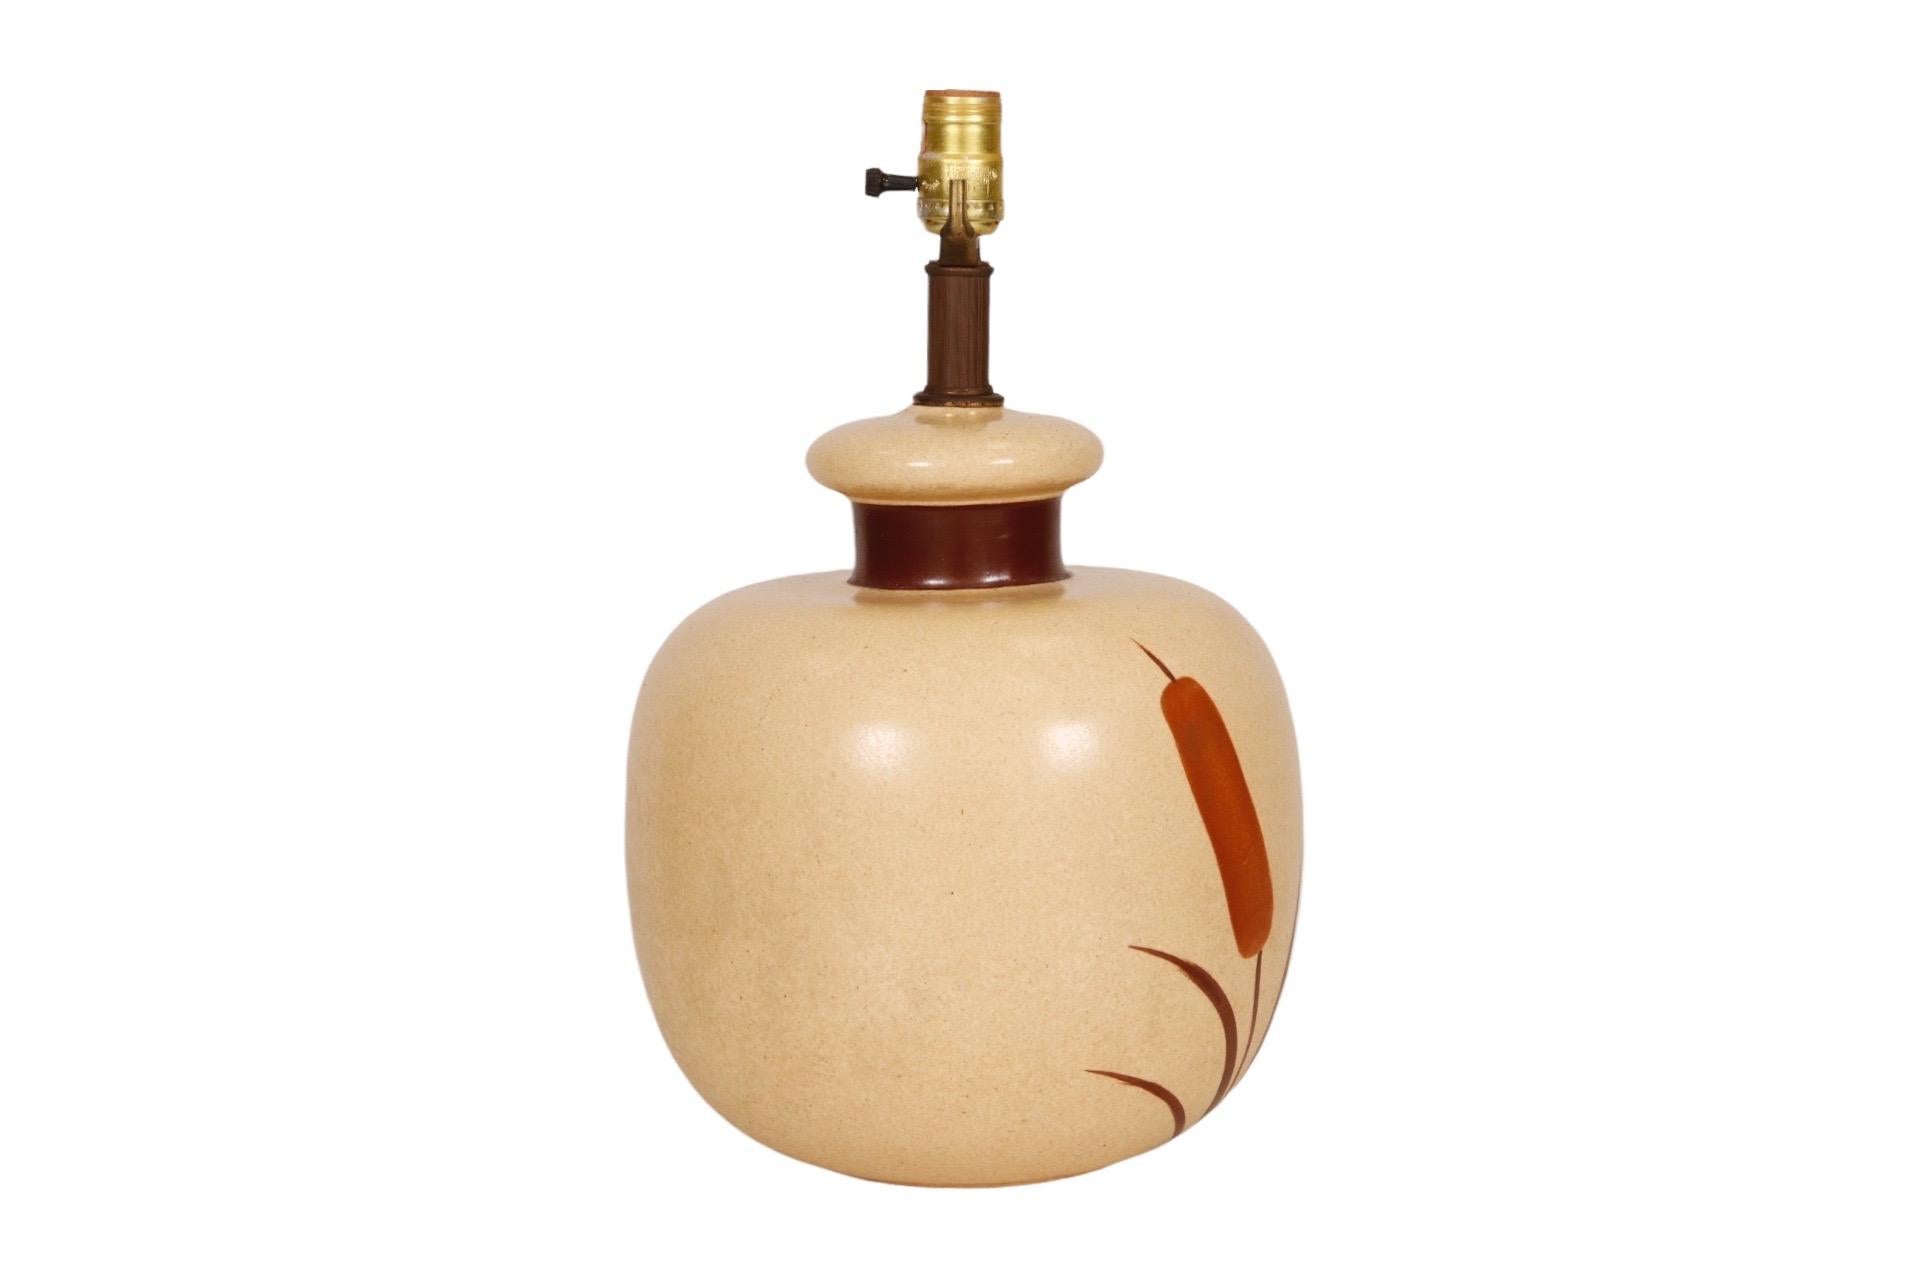 A ceramic gourd shaped table lamp in a lightly speckled oatmeal glaze, decorated with hand painted caramel colored cattails on the body. The neck of the lamp is painted a burnt umber brown to match the leaves.
  